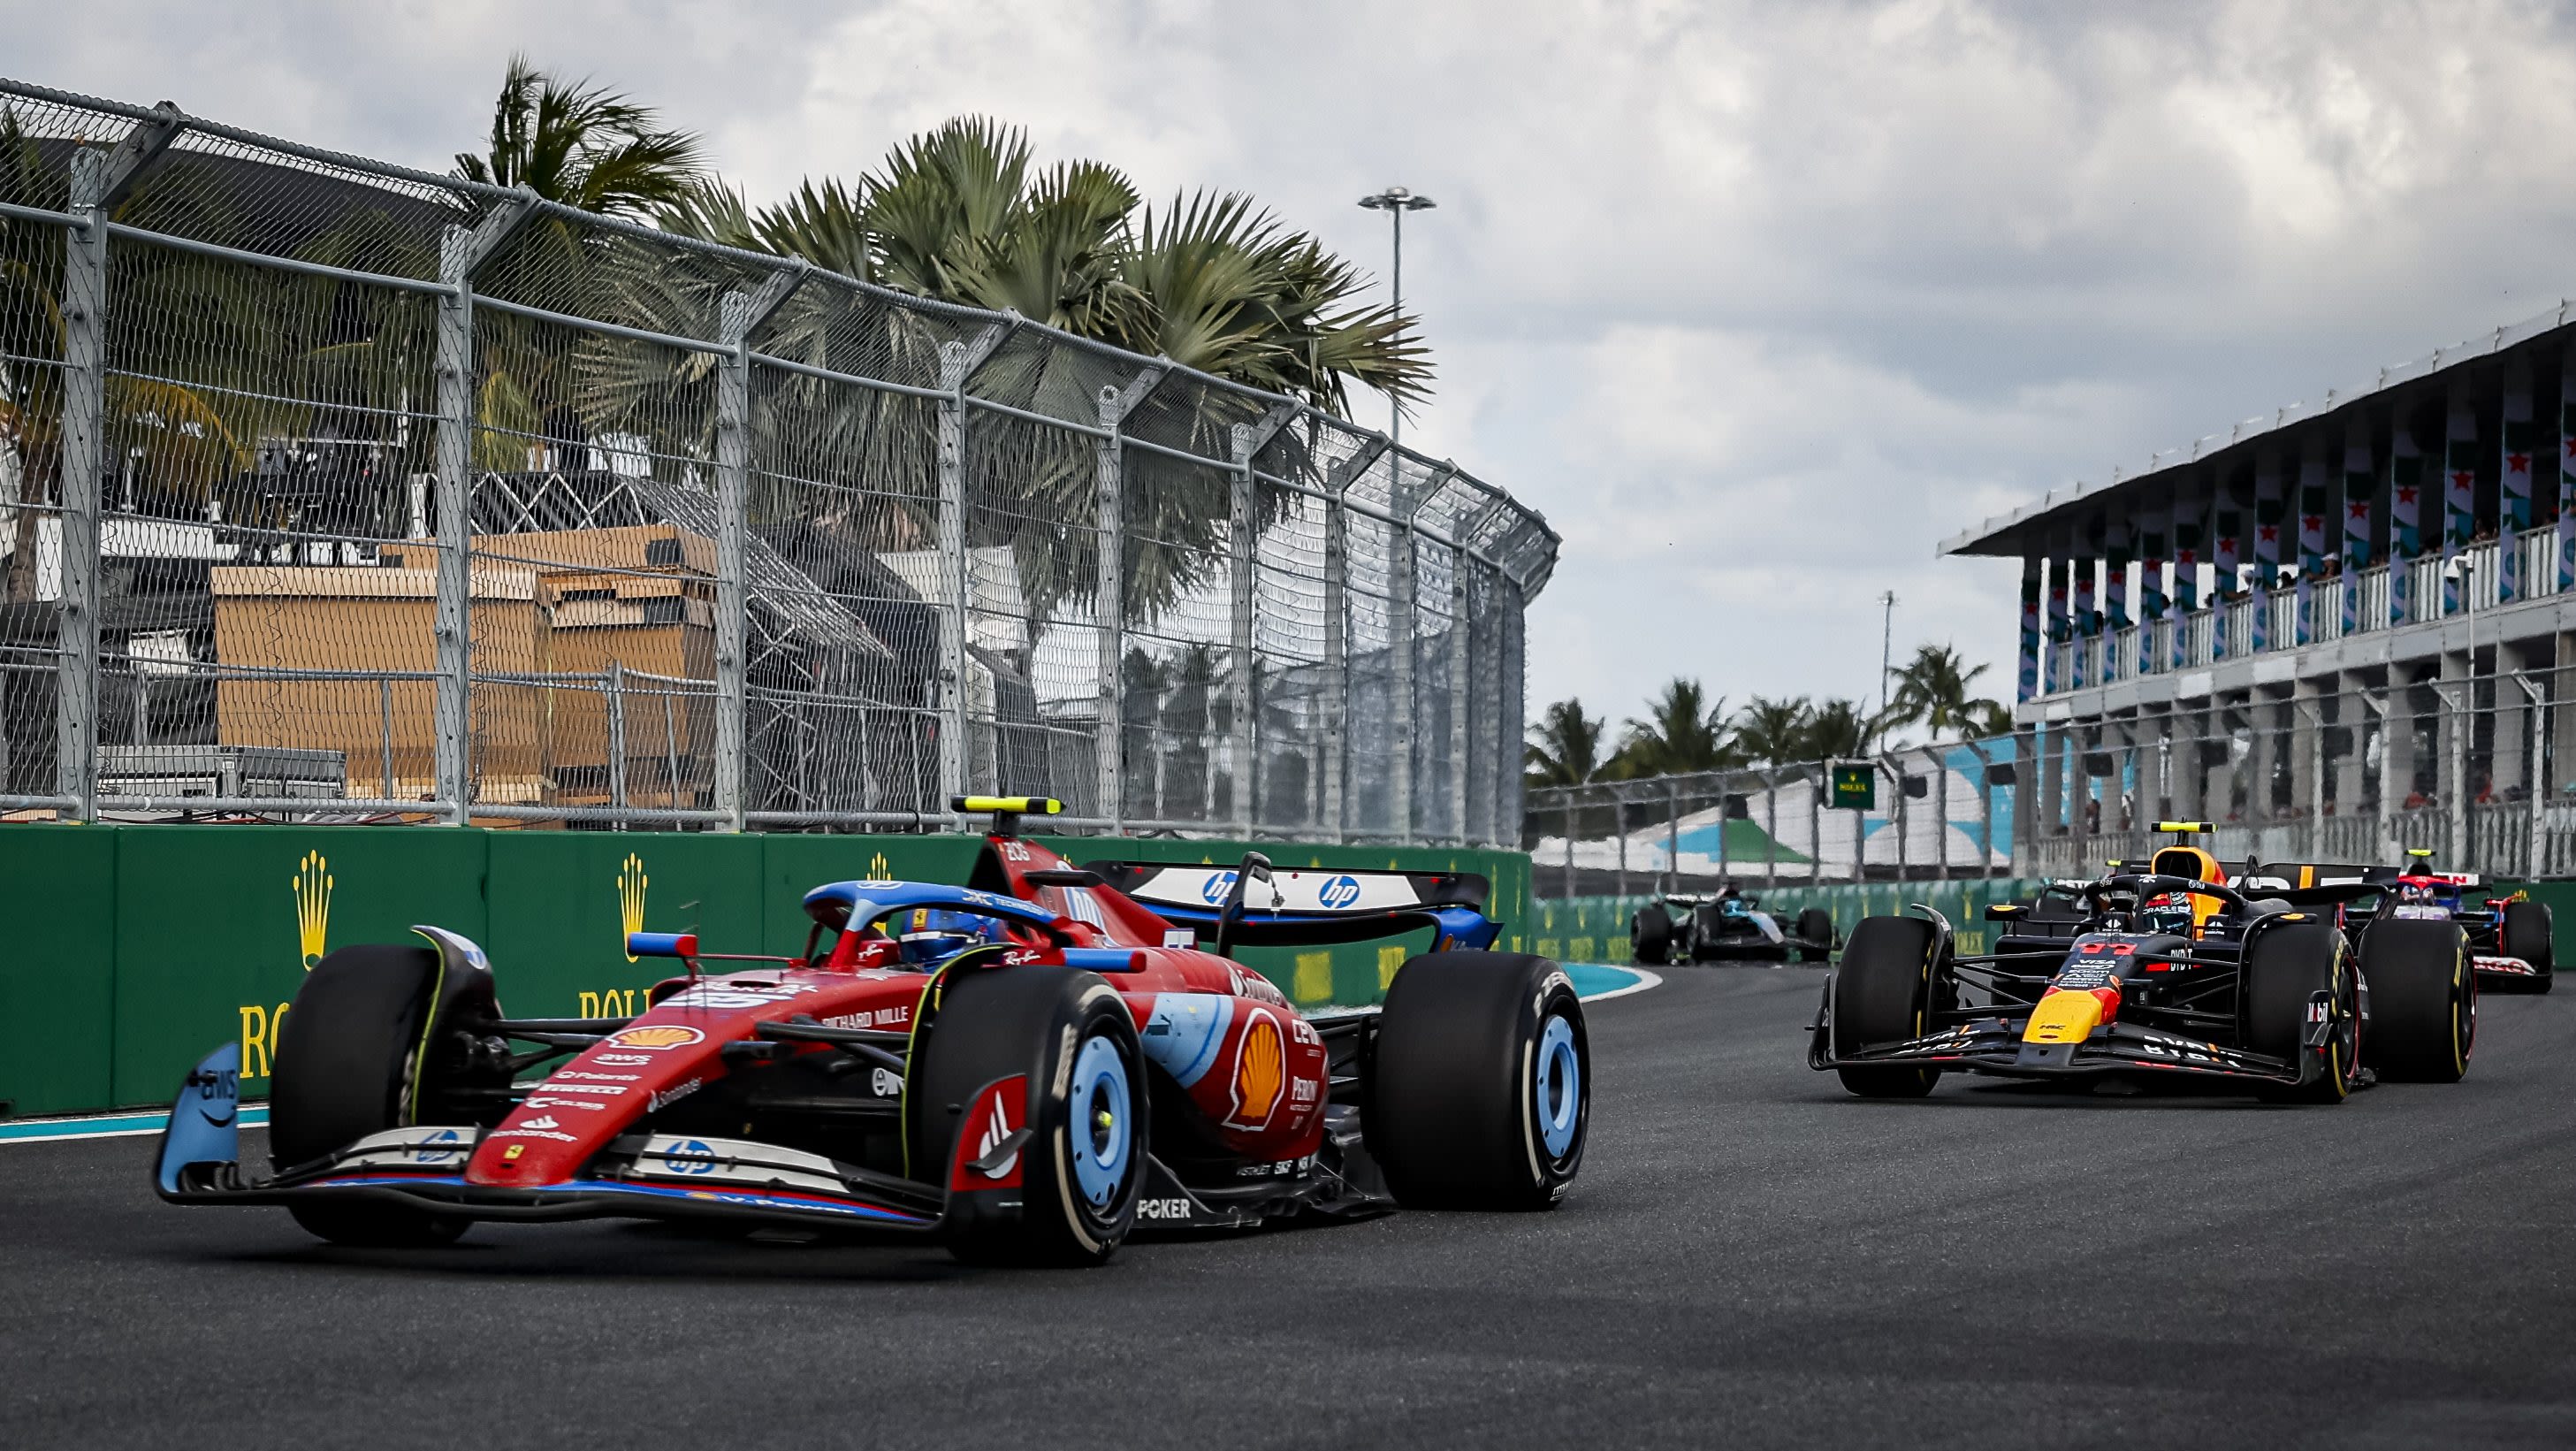 From a Ferrari Debut to a New F1 Winner: Here’s What We Saw at the Miami Grand Prix